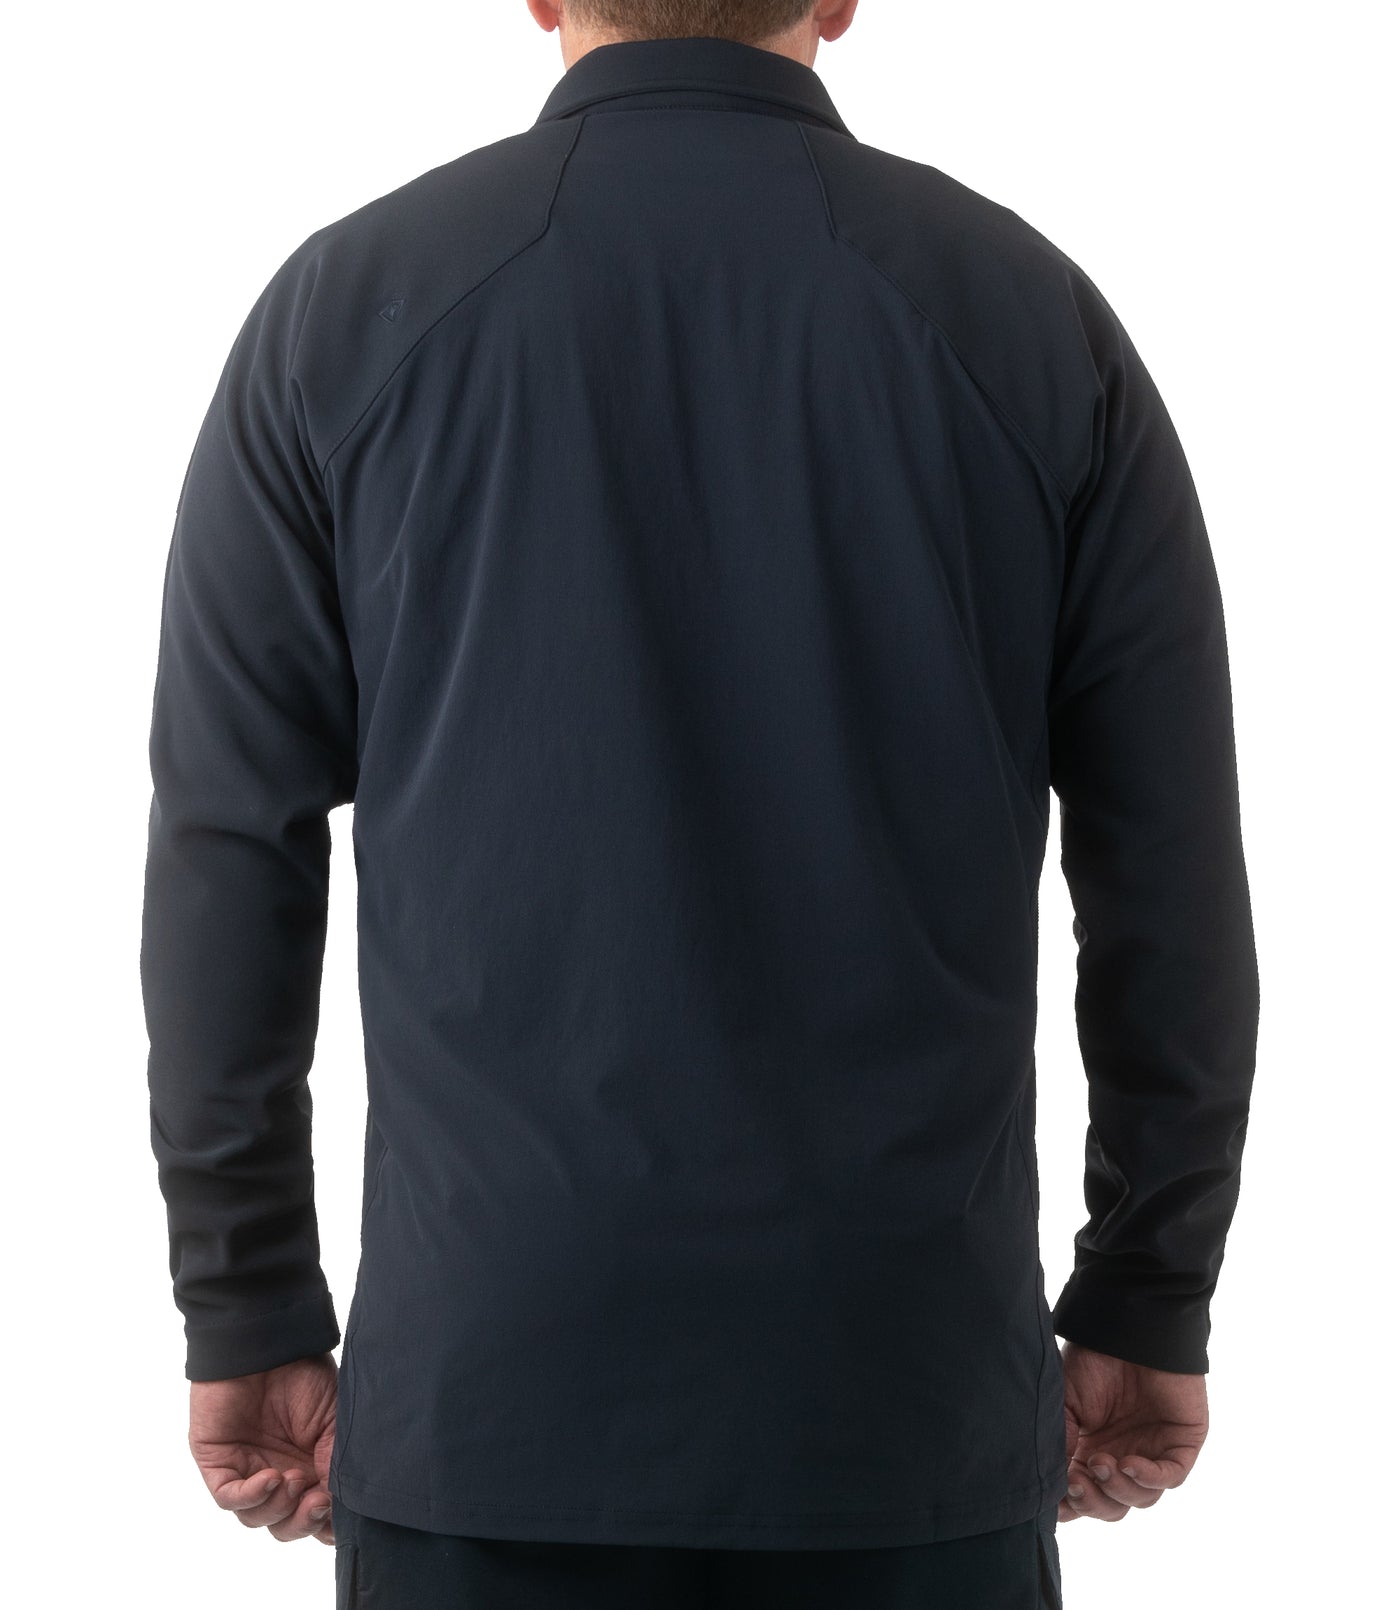 Men's Pro Duty Pullover – First Tactical